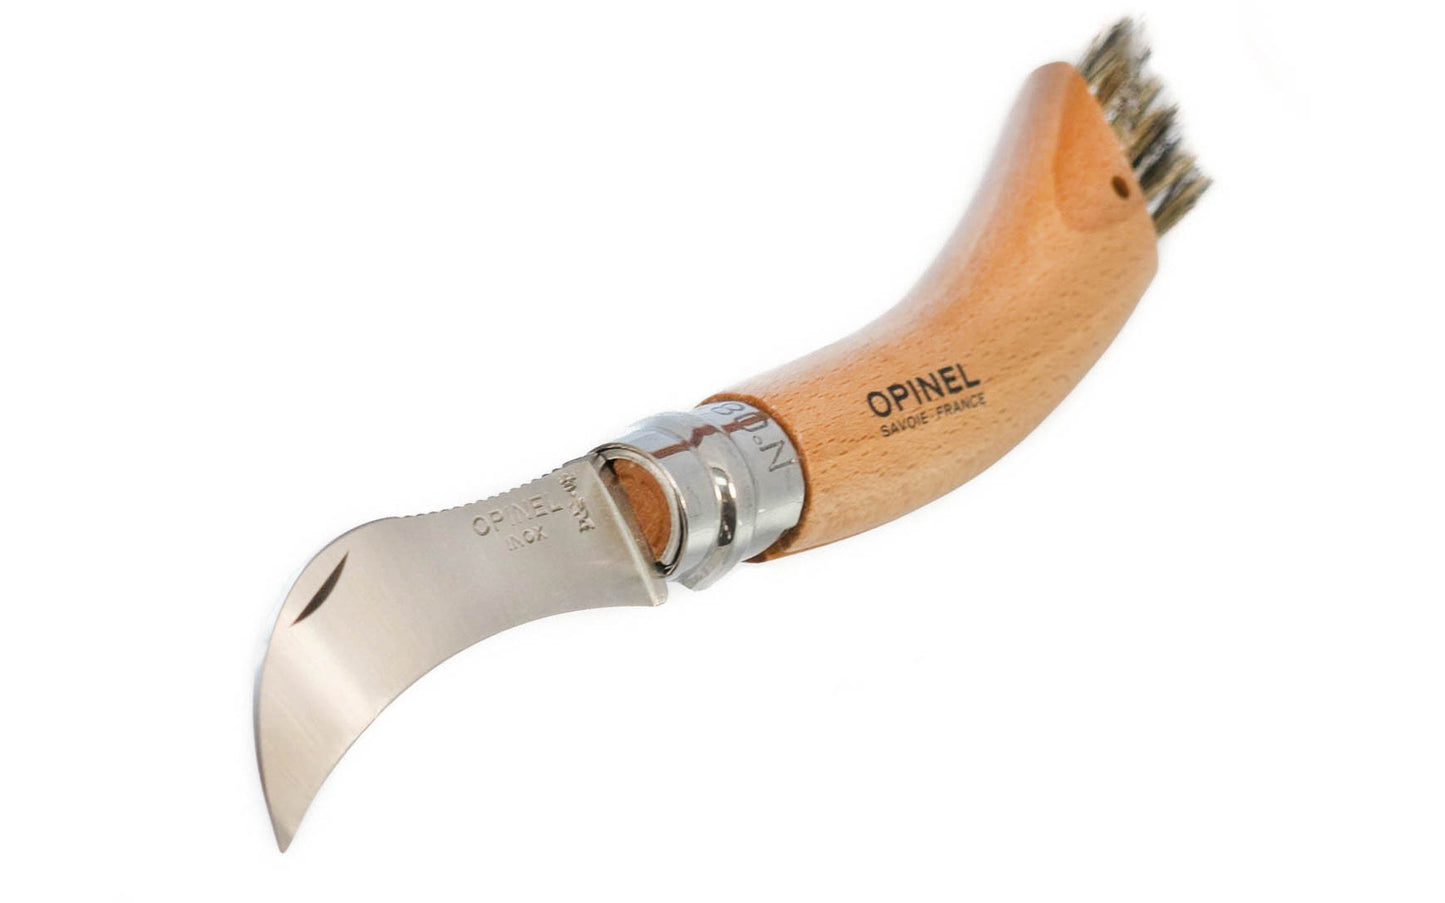 Made in France · Opinel Stainless Steel Mushroom Knife. 3" long foldable blade with stainless locking collar. Specially designed for harvesting & cleaning mushrooms. Made of 12c27 Sandvik stainless steel. Beechwood handle with Genuine Boar's hair brush. Couteau a Champignon No. 08.